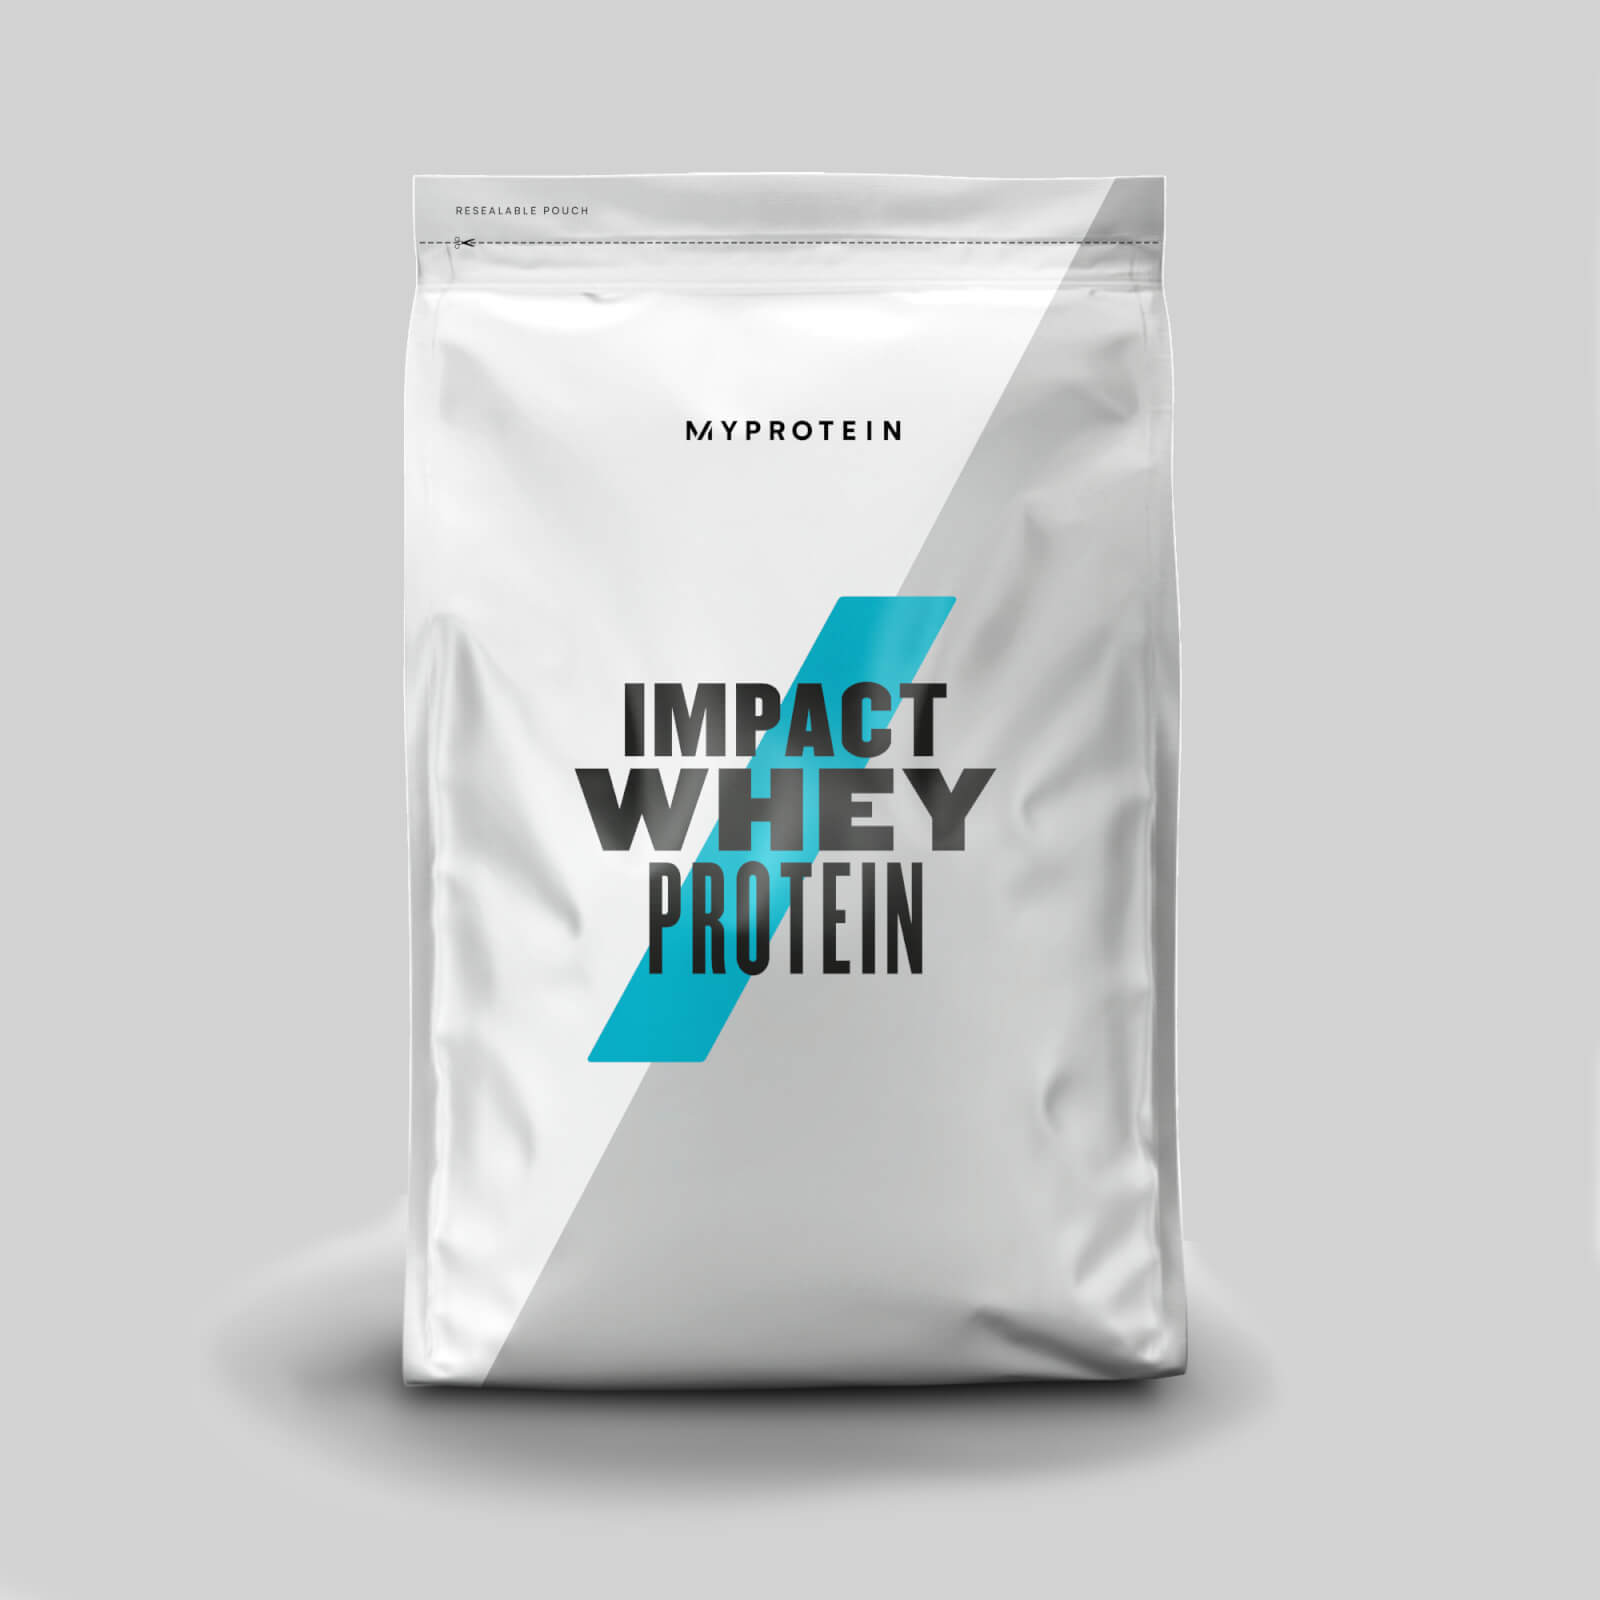 Impact Whey Protein. - 40servings - Unflavored